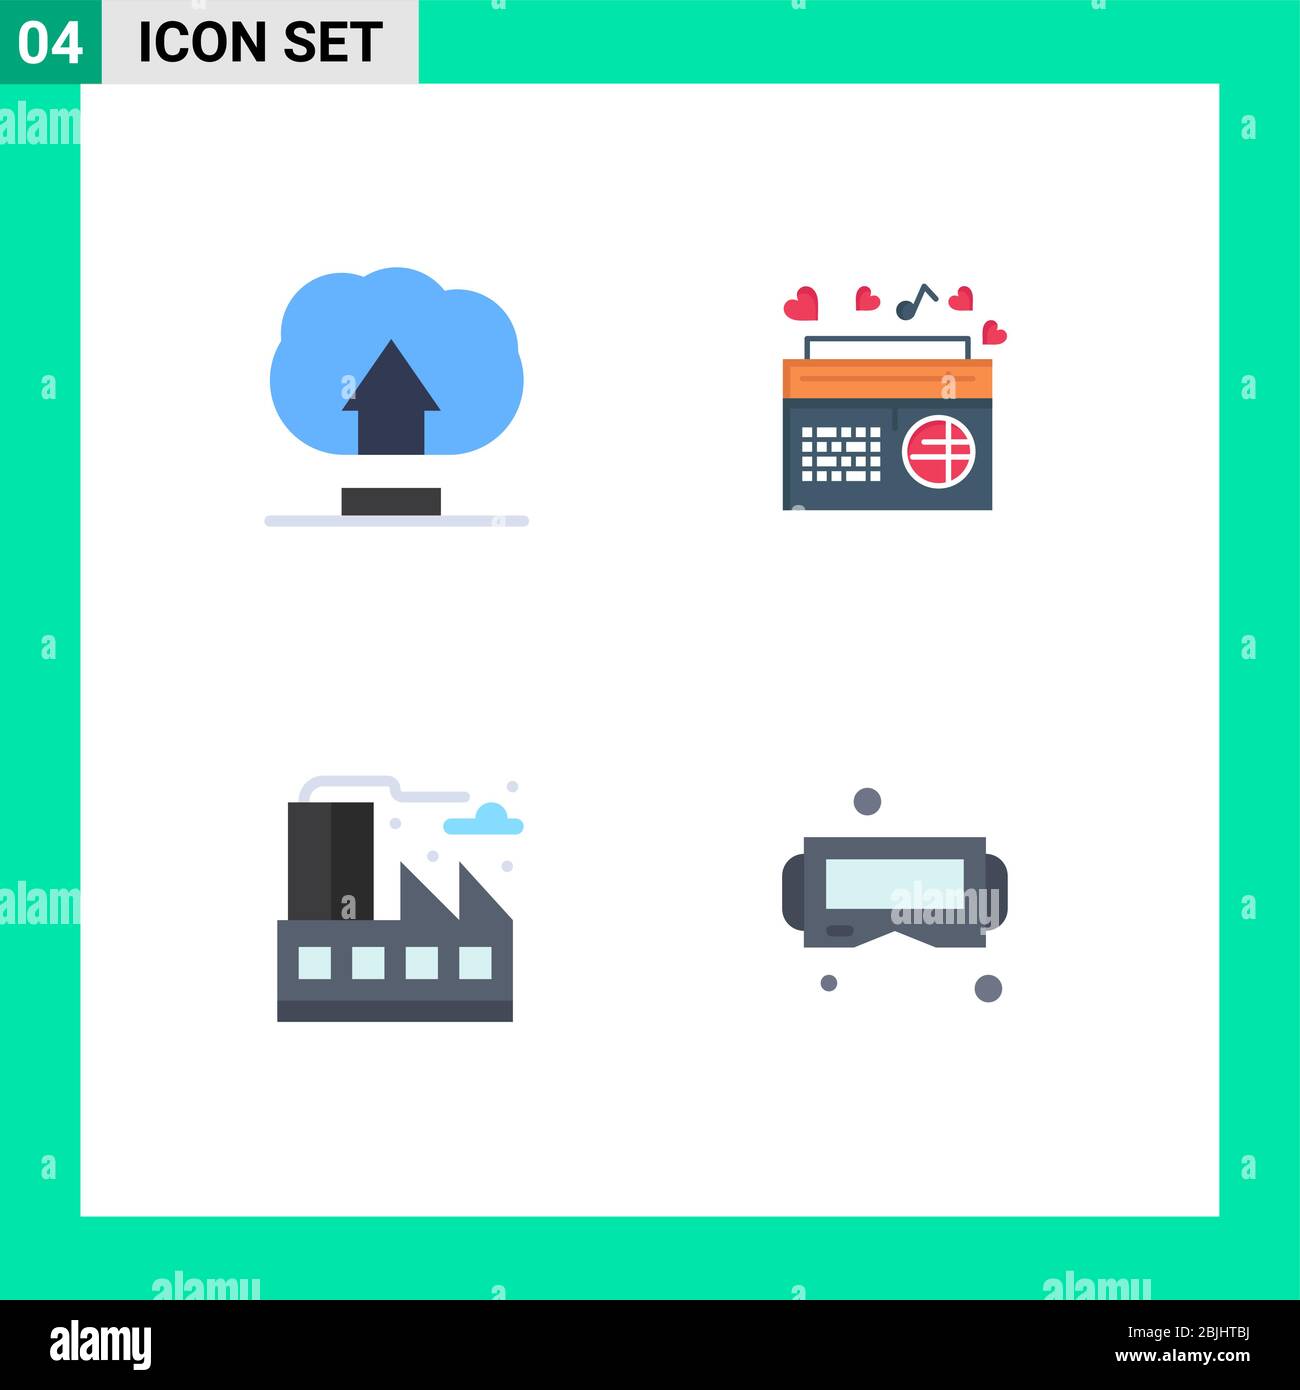 Modern Set of 4 Flat Icons Pictograph of interface, life, radio, speaker, device Editable Vector Design Elements Stock Vector